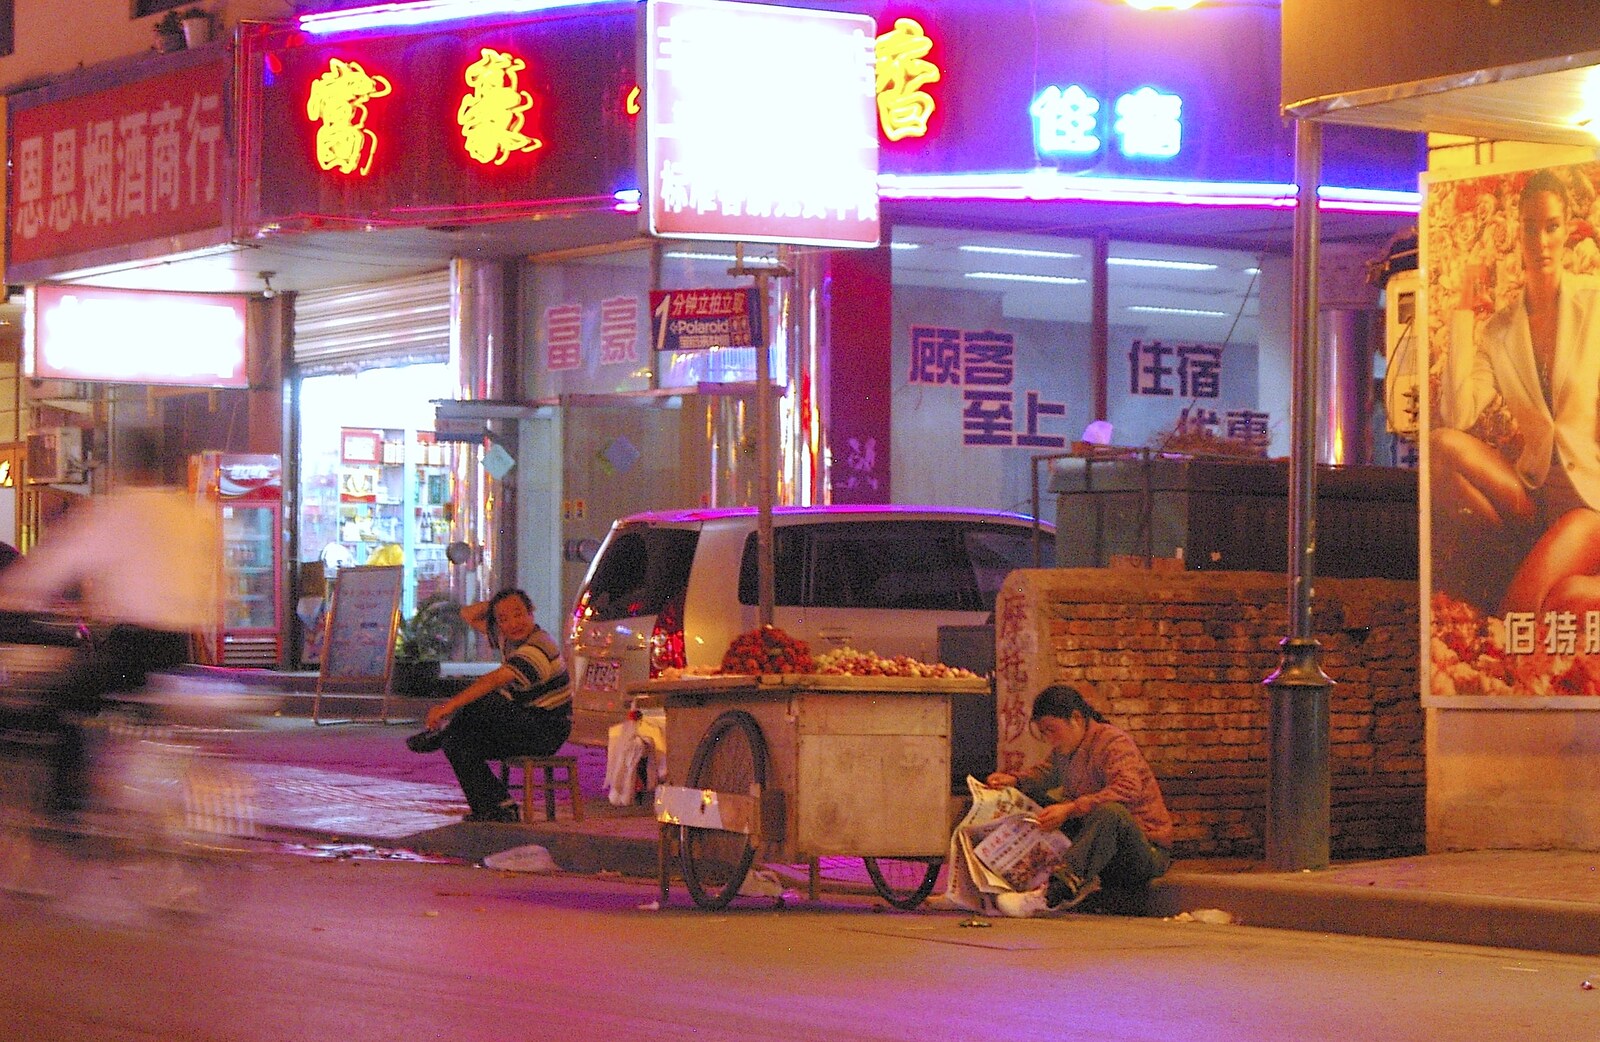 A girl sits on the kerb, waiting for sales from Nanjing by Night, Nanjing, Jiangsu Province, China - 4th October 2006